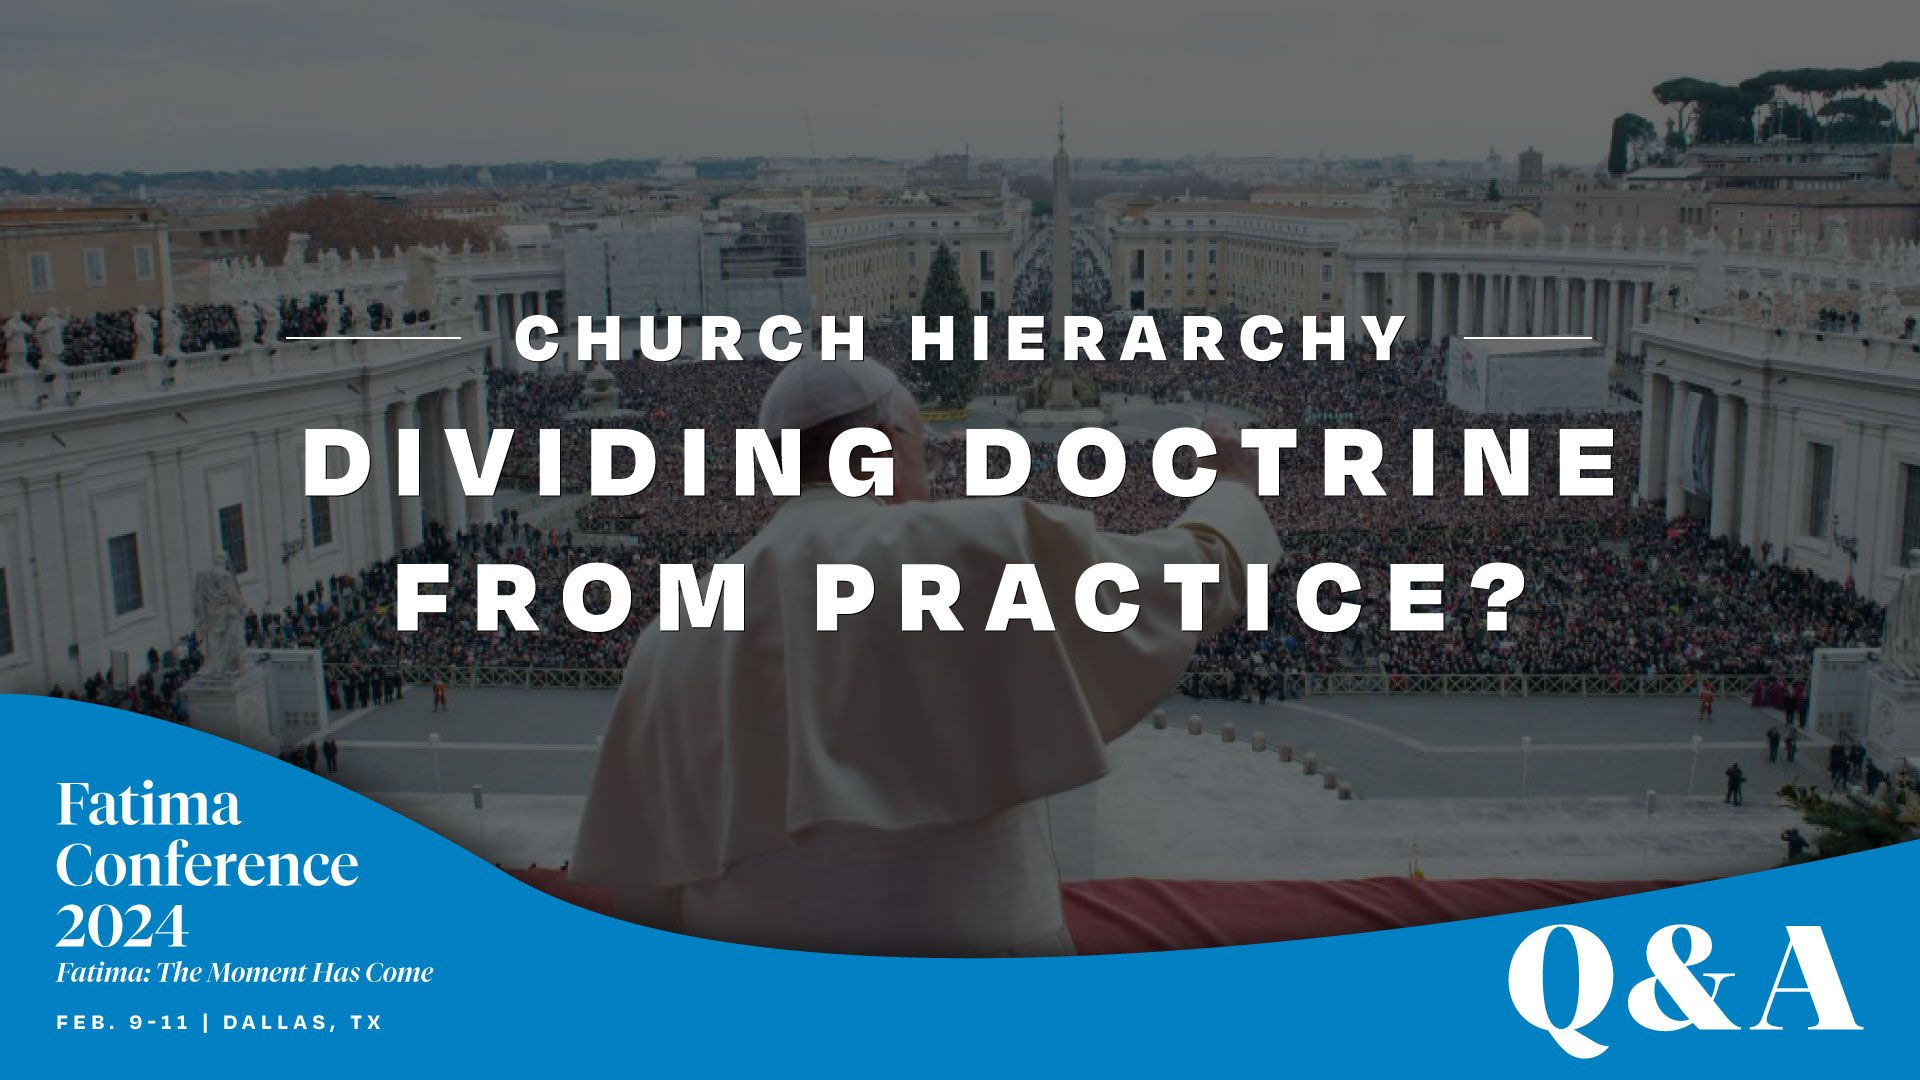 Is the Church Hierarchy Dividing Doctrine from Practice?